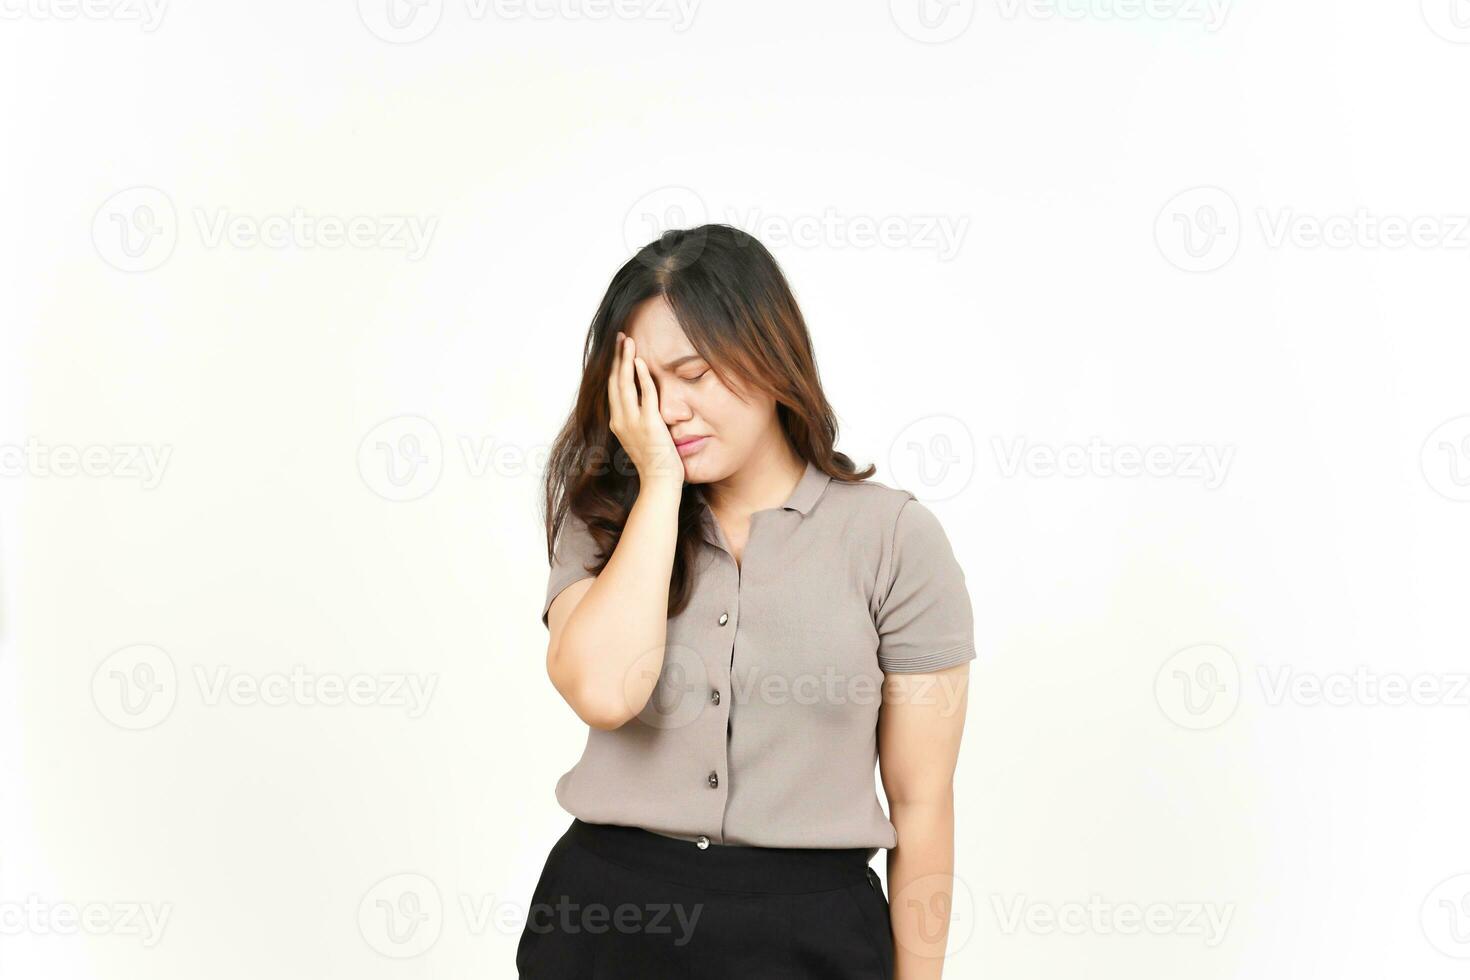 Suffering Headache Gesture Of Beautiful Asian Woman Isolated On White Background photo